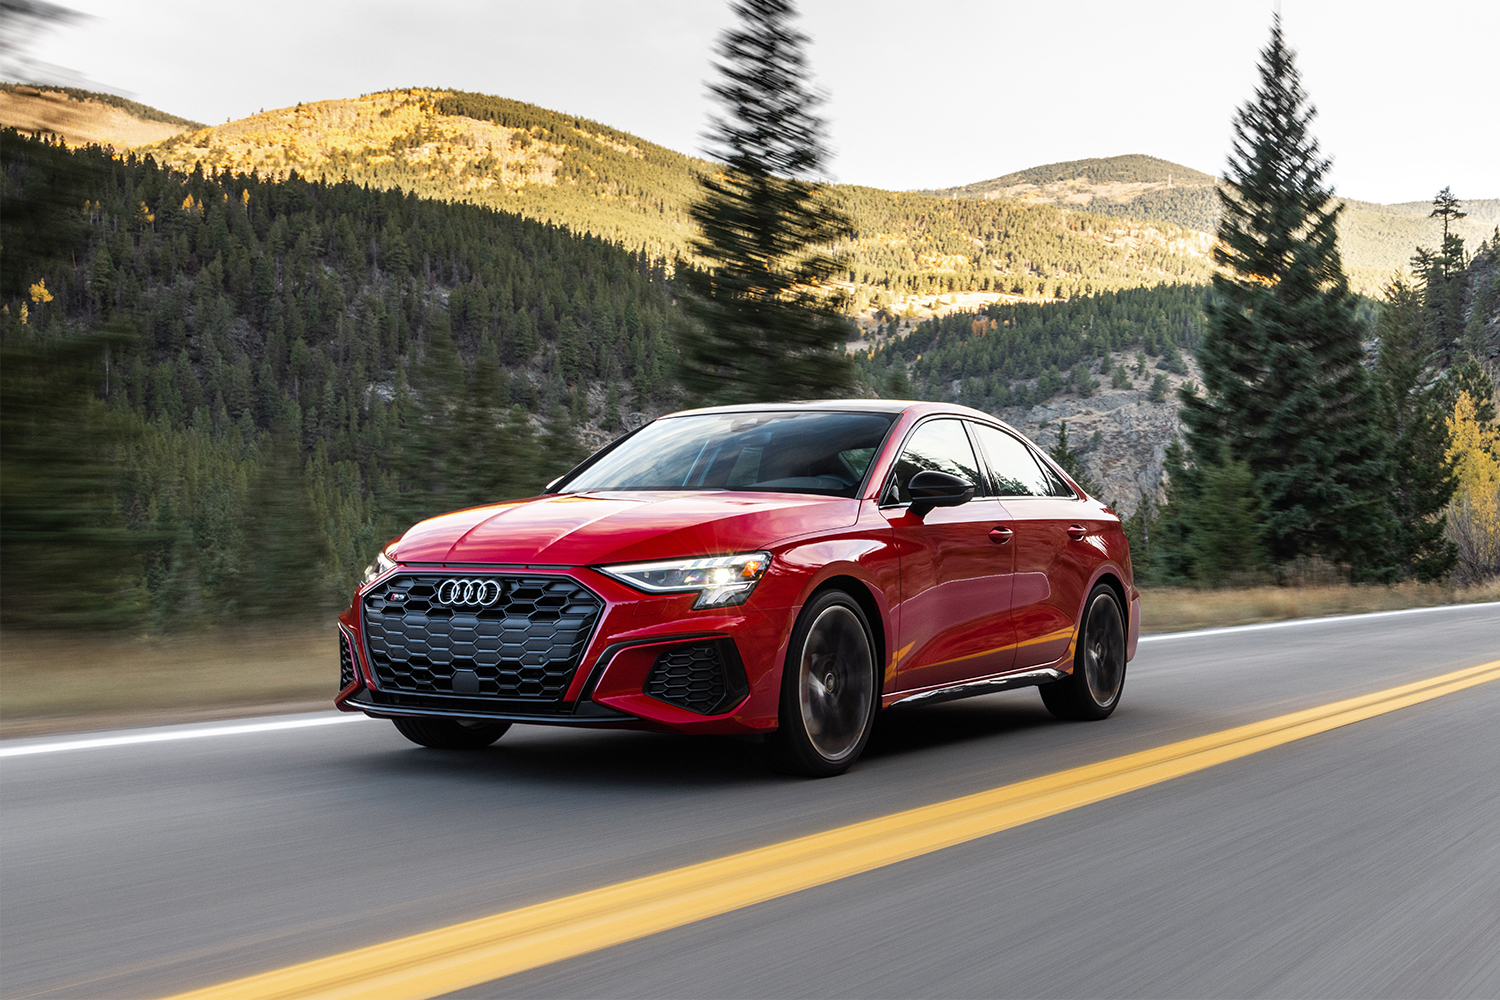 The 2022 Audi S3 in red driving along a two-lane road with hills and trees in the background